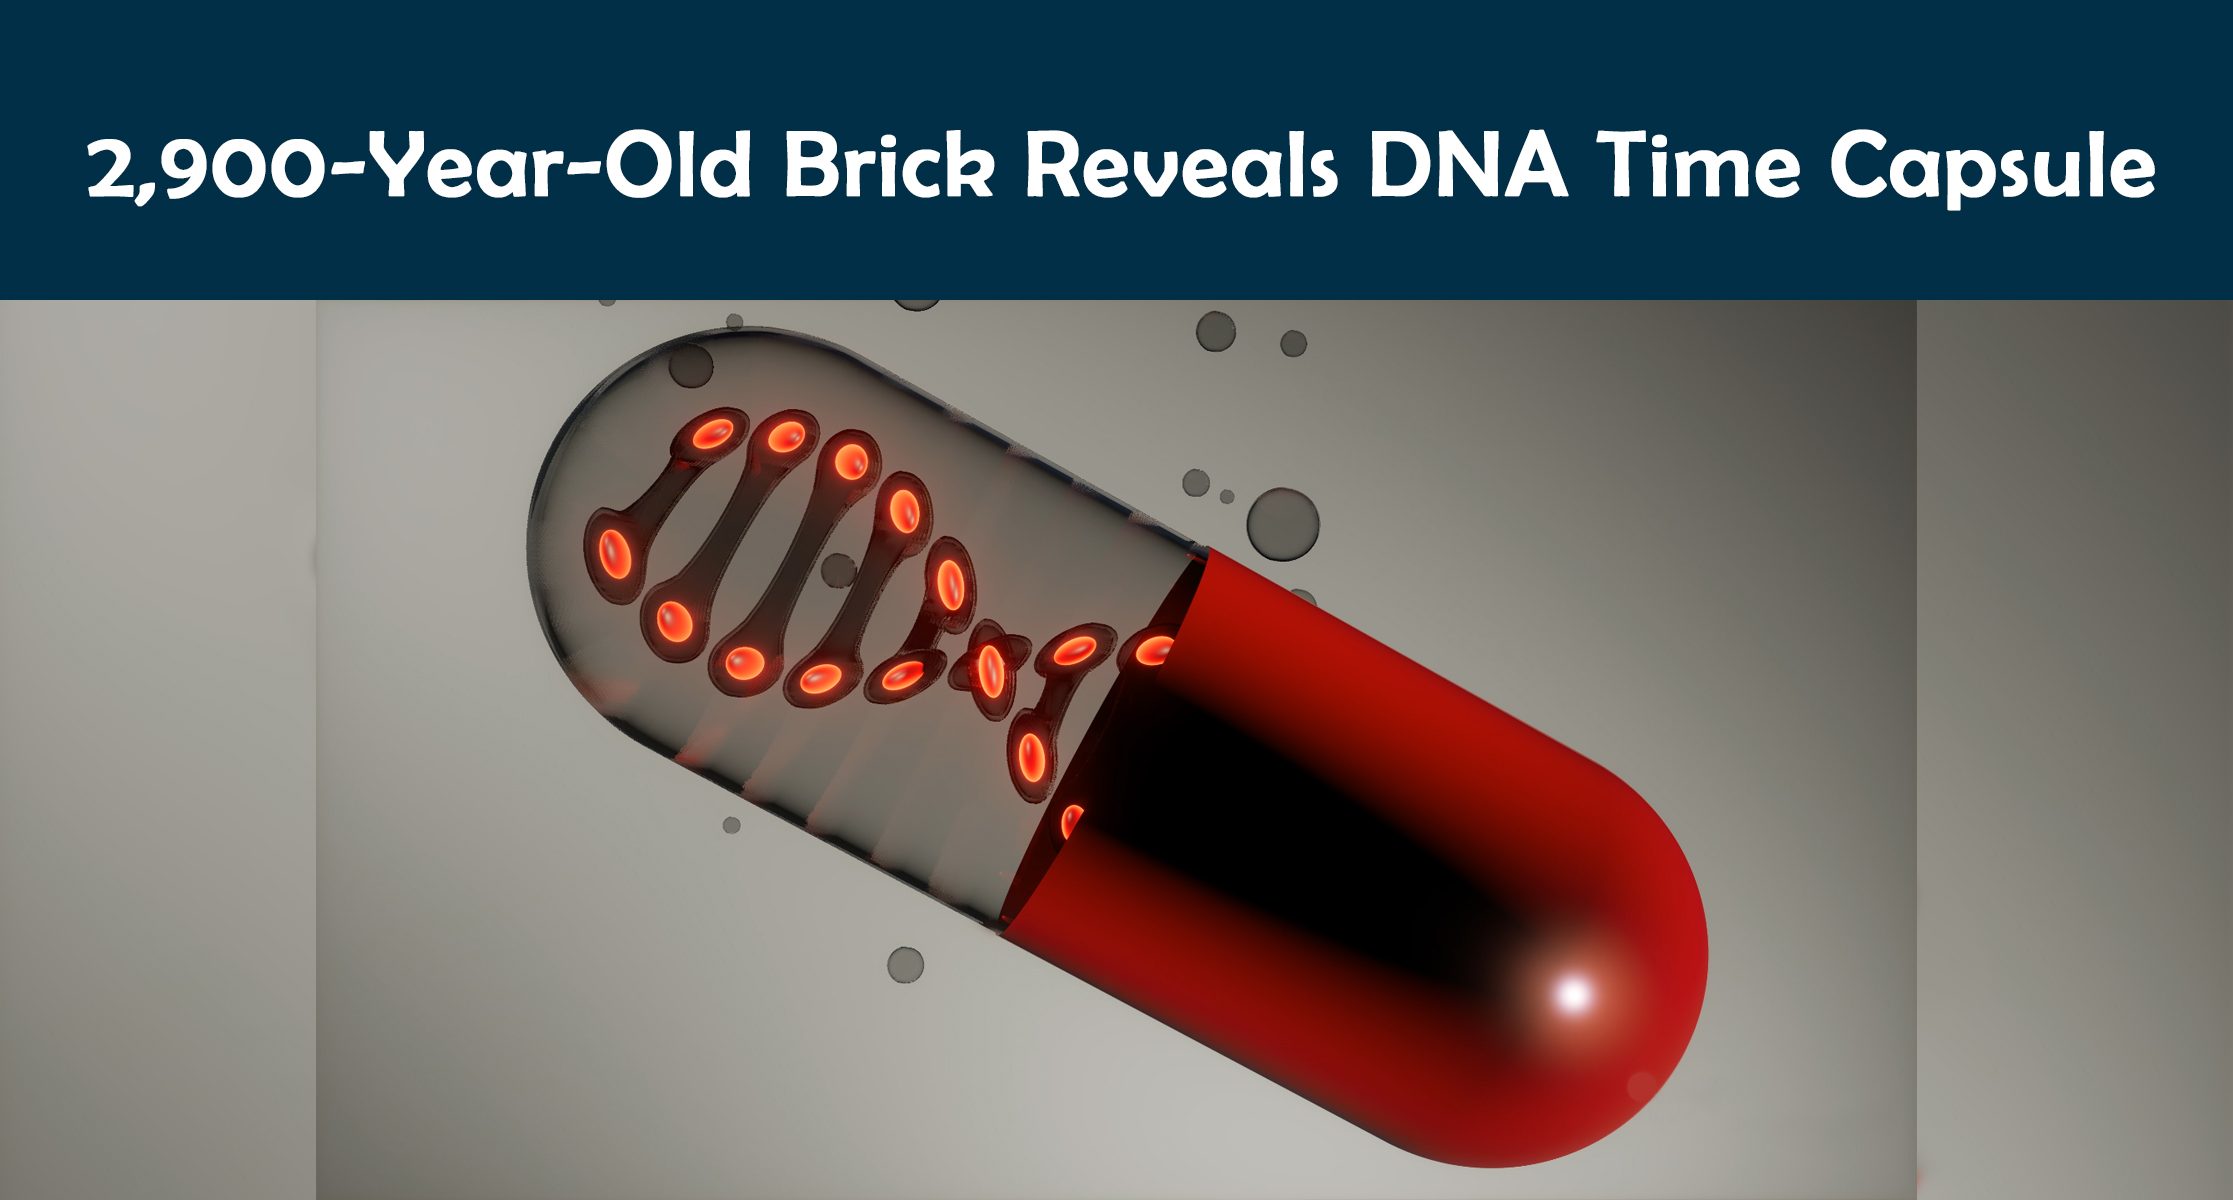 2,900-Year-Old Brick Reveals DNA Time Capsule